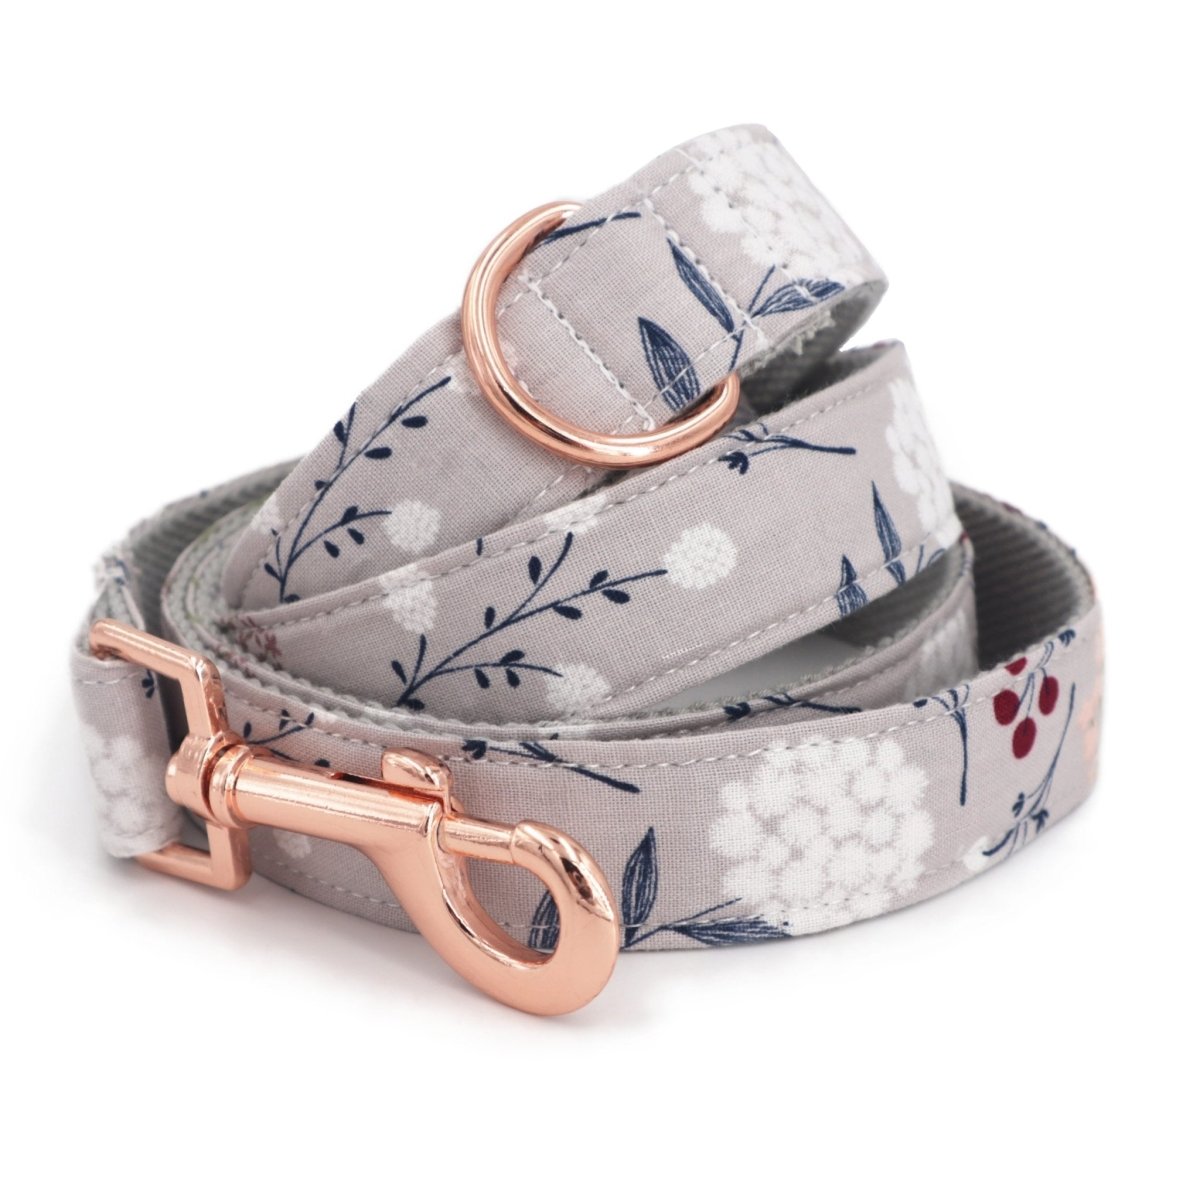 designer dog collars and leashes - dog flower collar with name - floral dog collar wedding